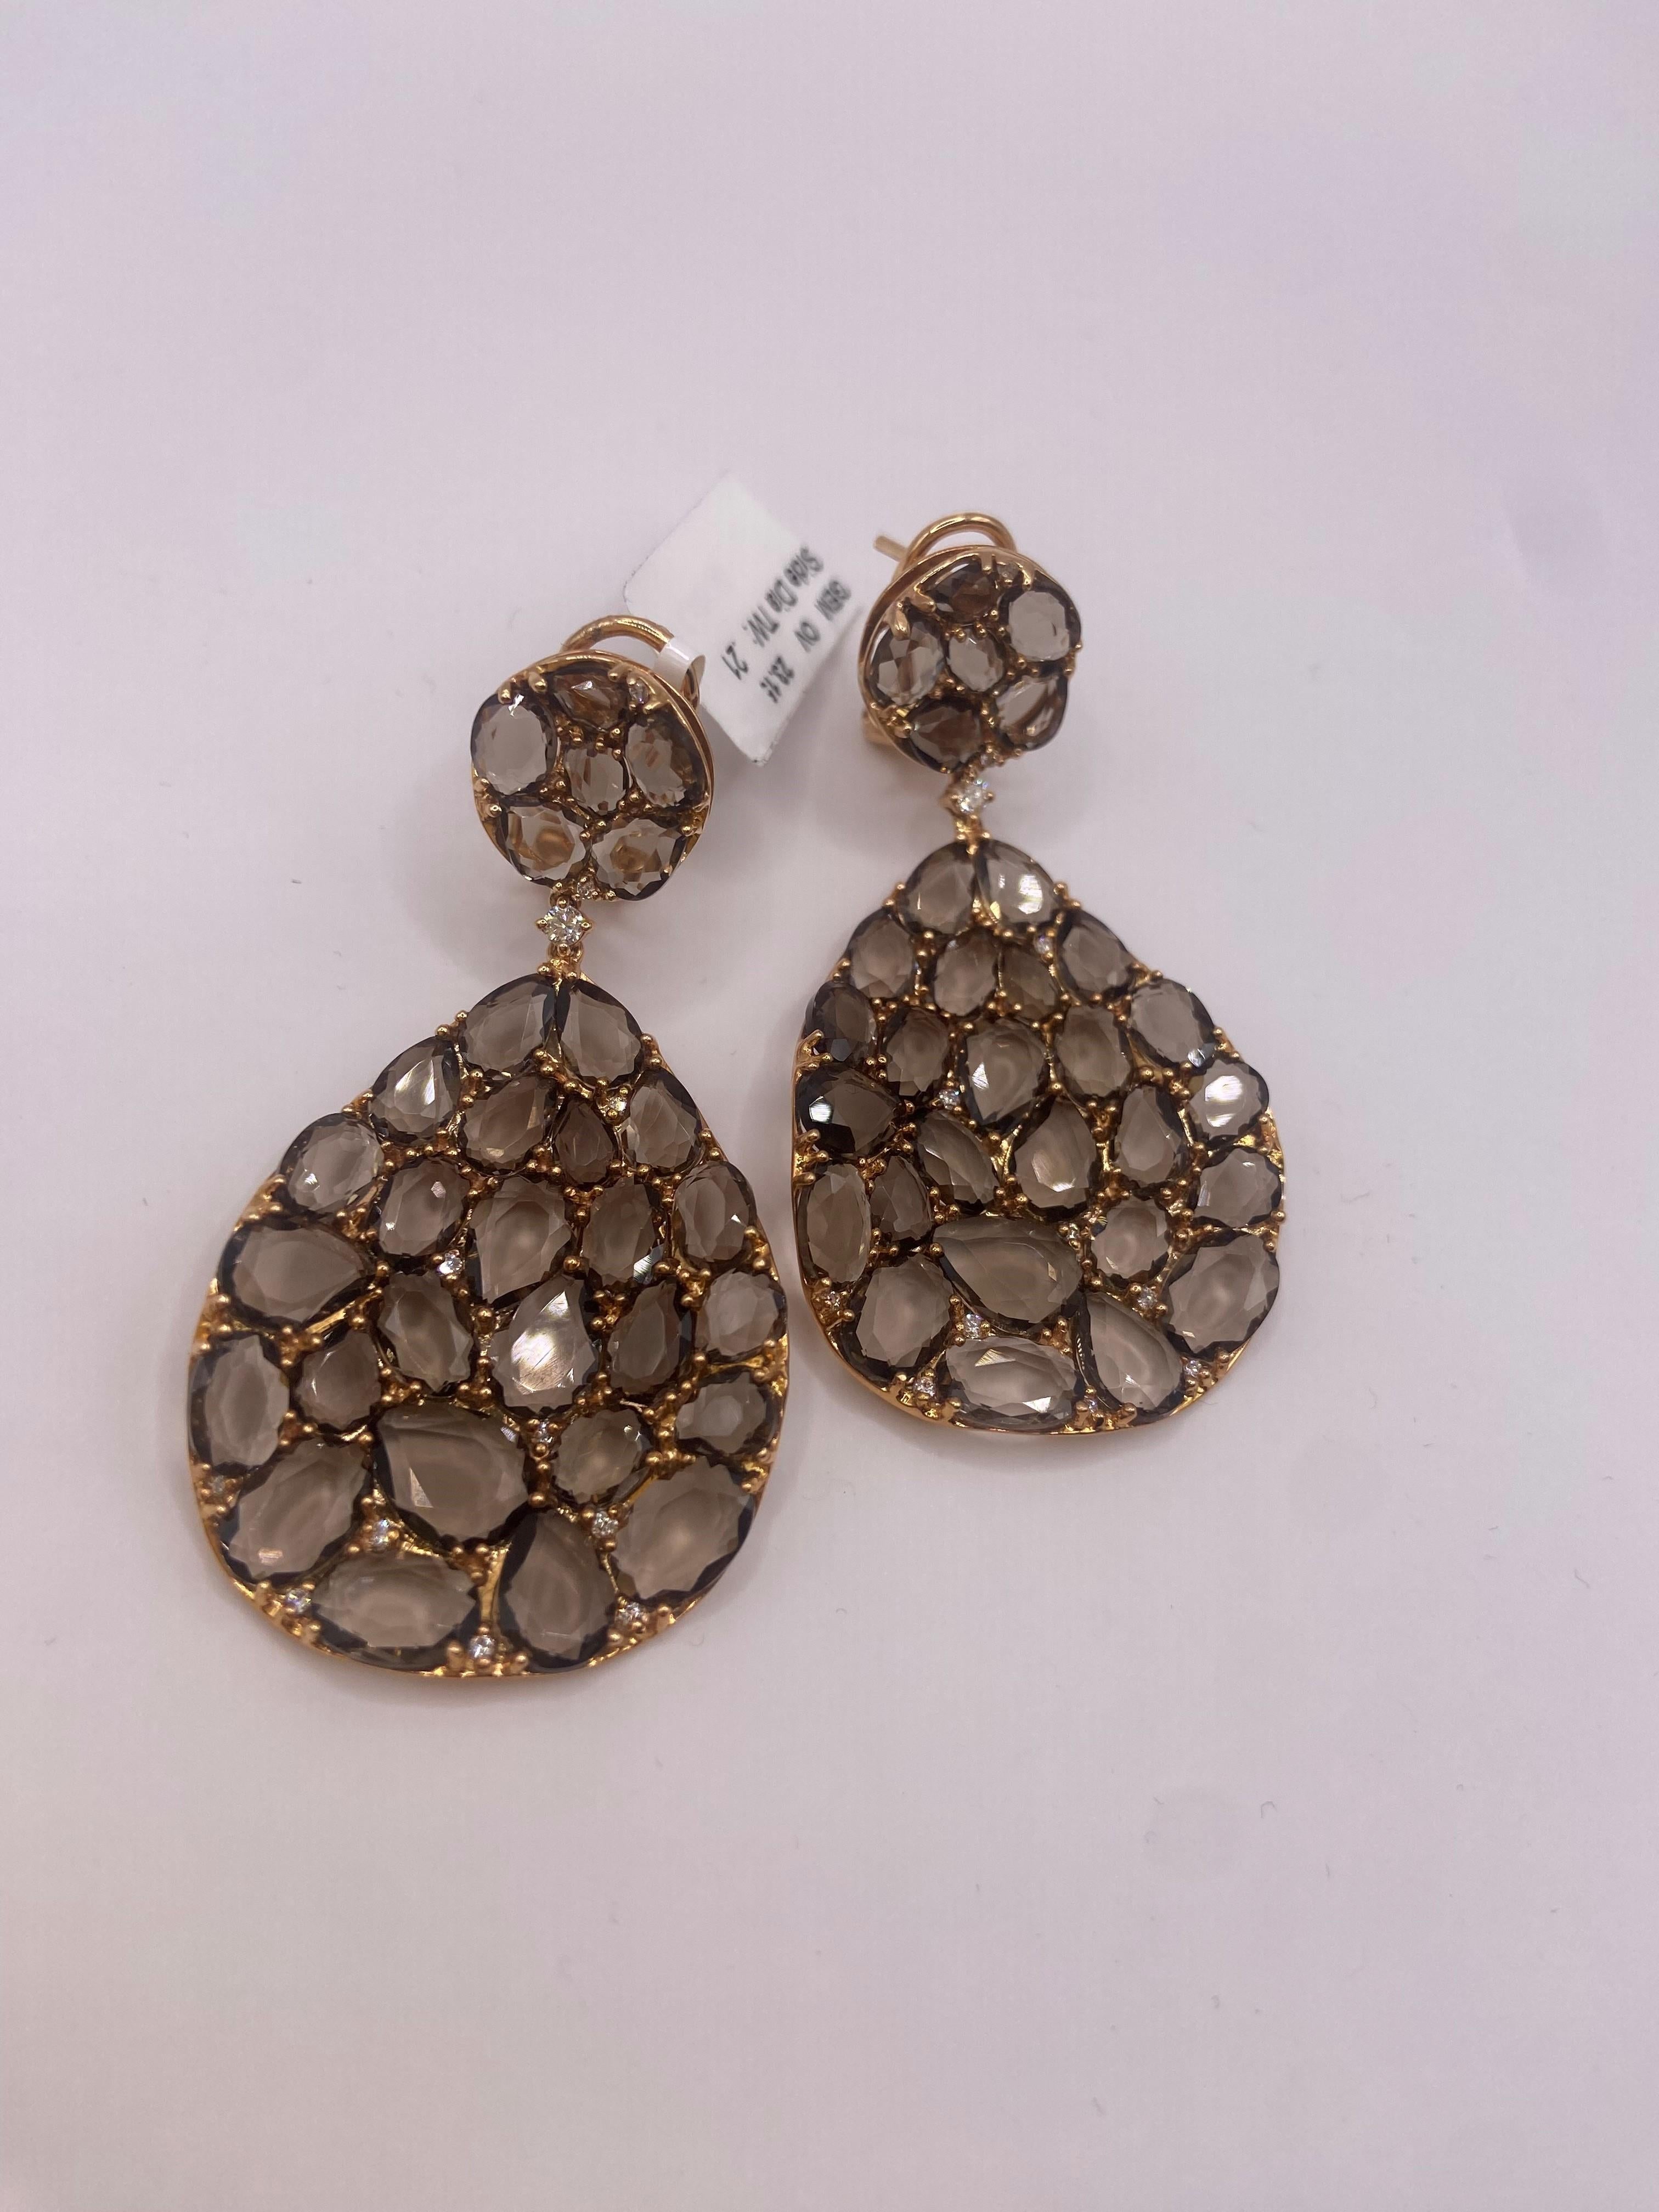 •	18KT Rose Gold
•	23.36 Carats

•	24 Round Diamonds: 0.21ctw
•	Color: F
•	Clarity SI1

•	Number of Quartz: 62
•	Carat Weight: 23.15ctw

This pair of earrings is made with 62 rose cut brown quartz stones. The stones are set in 18KT rose gold and